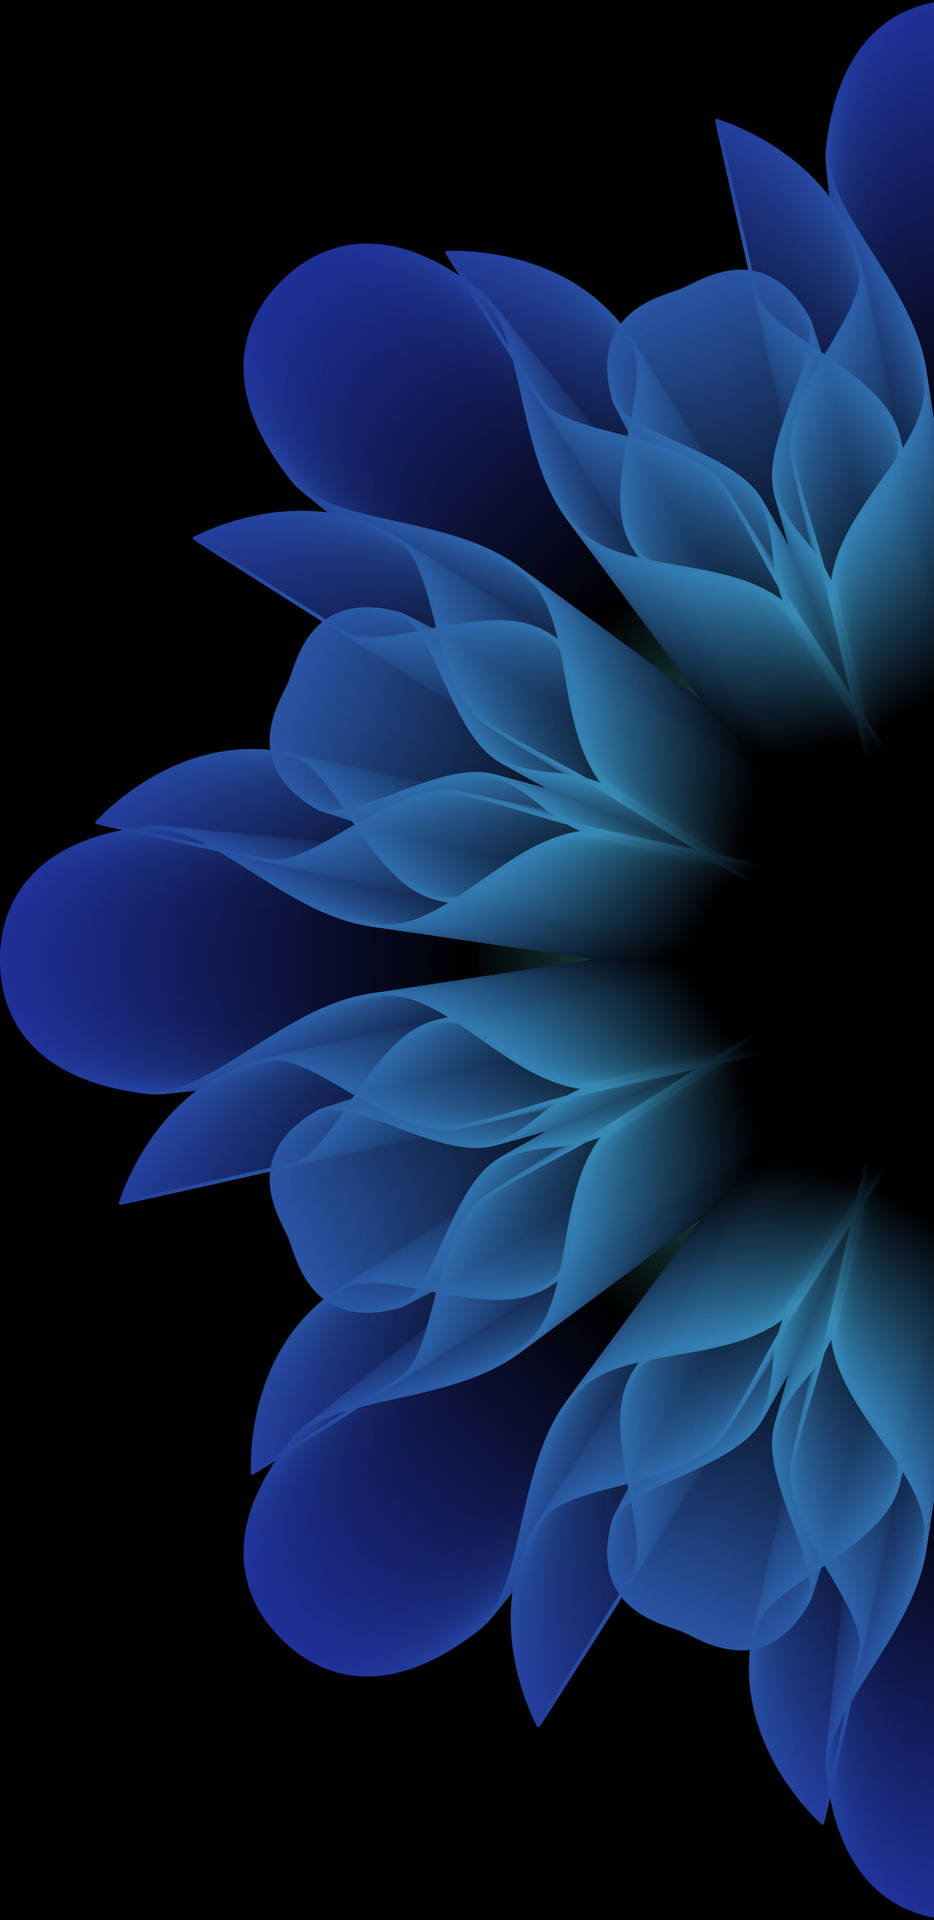 Amoled Android Solid Pastel Blue Flower